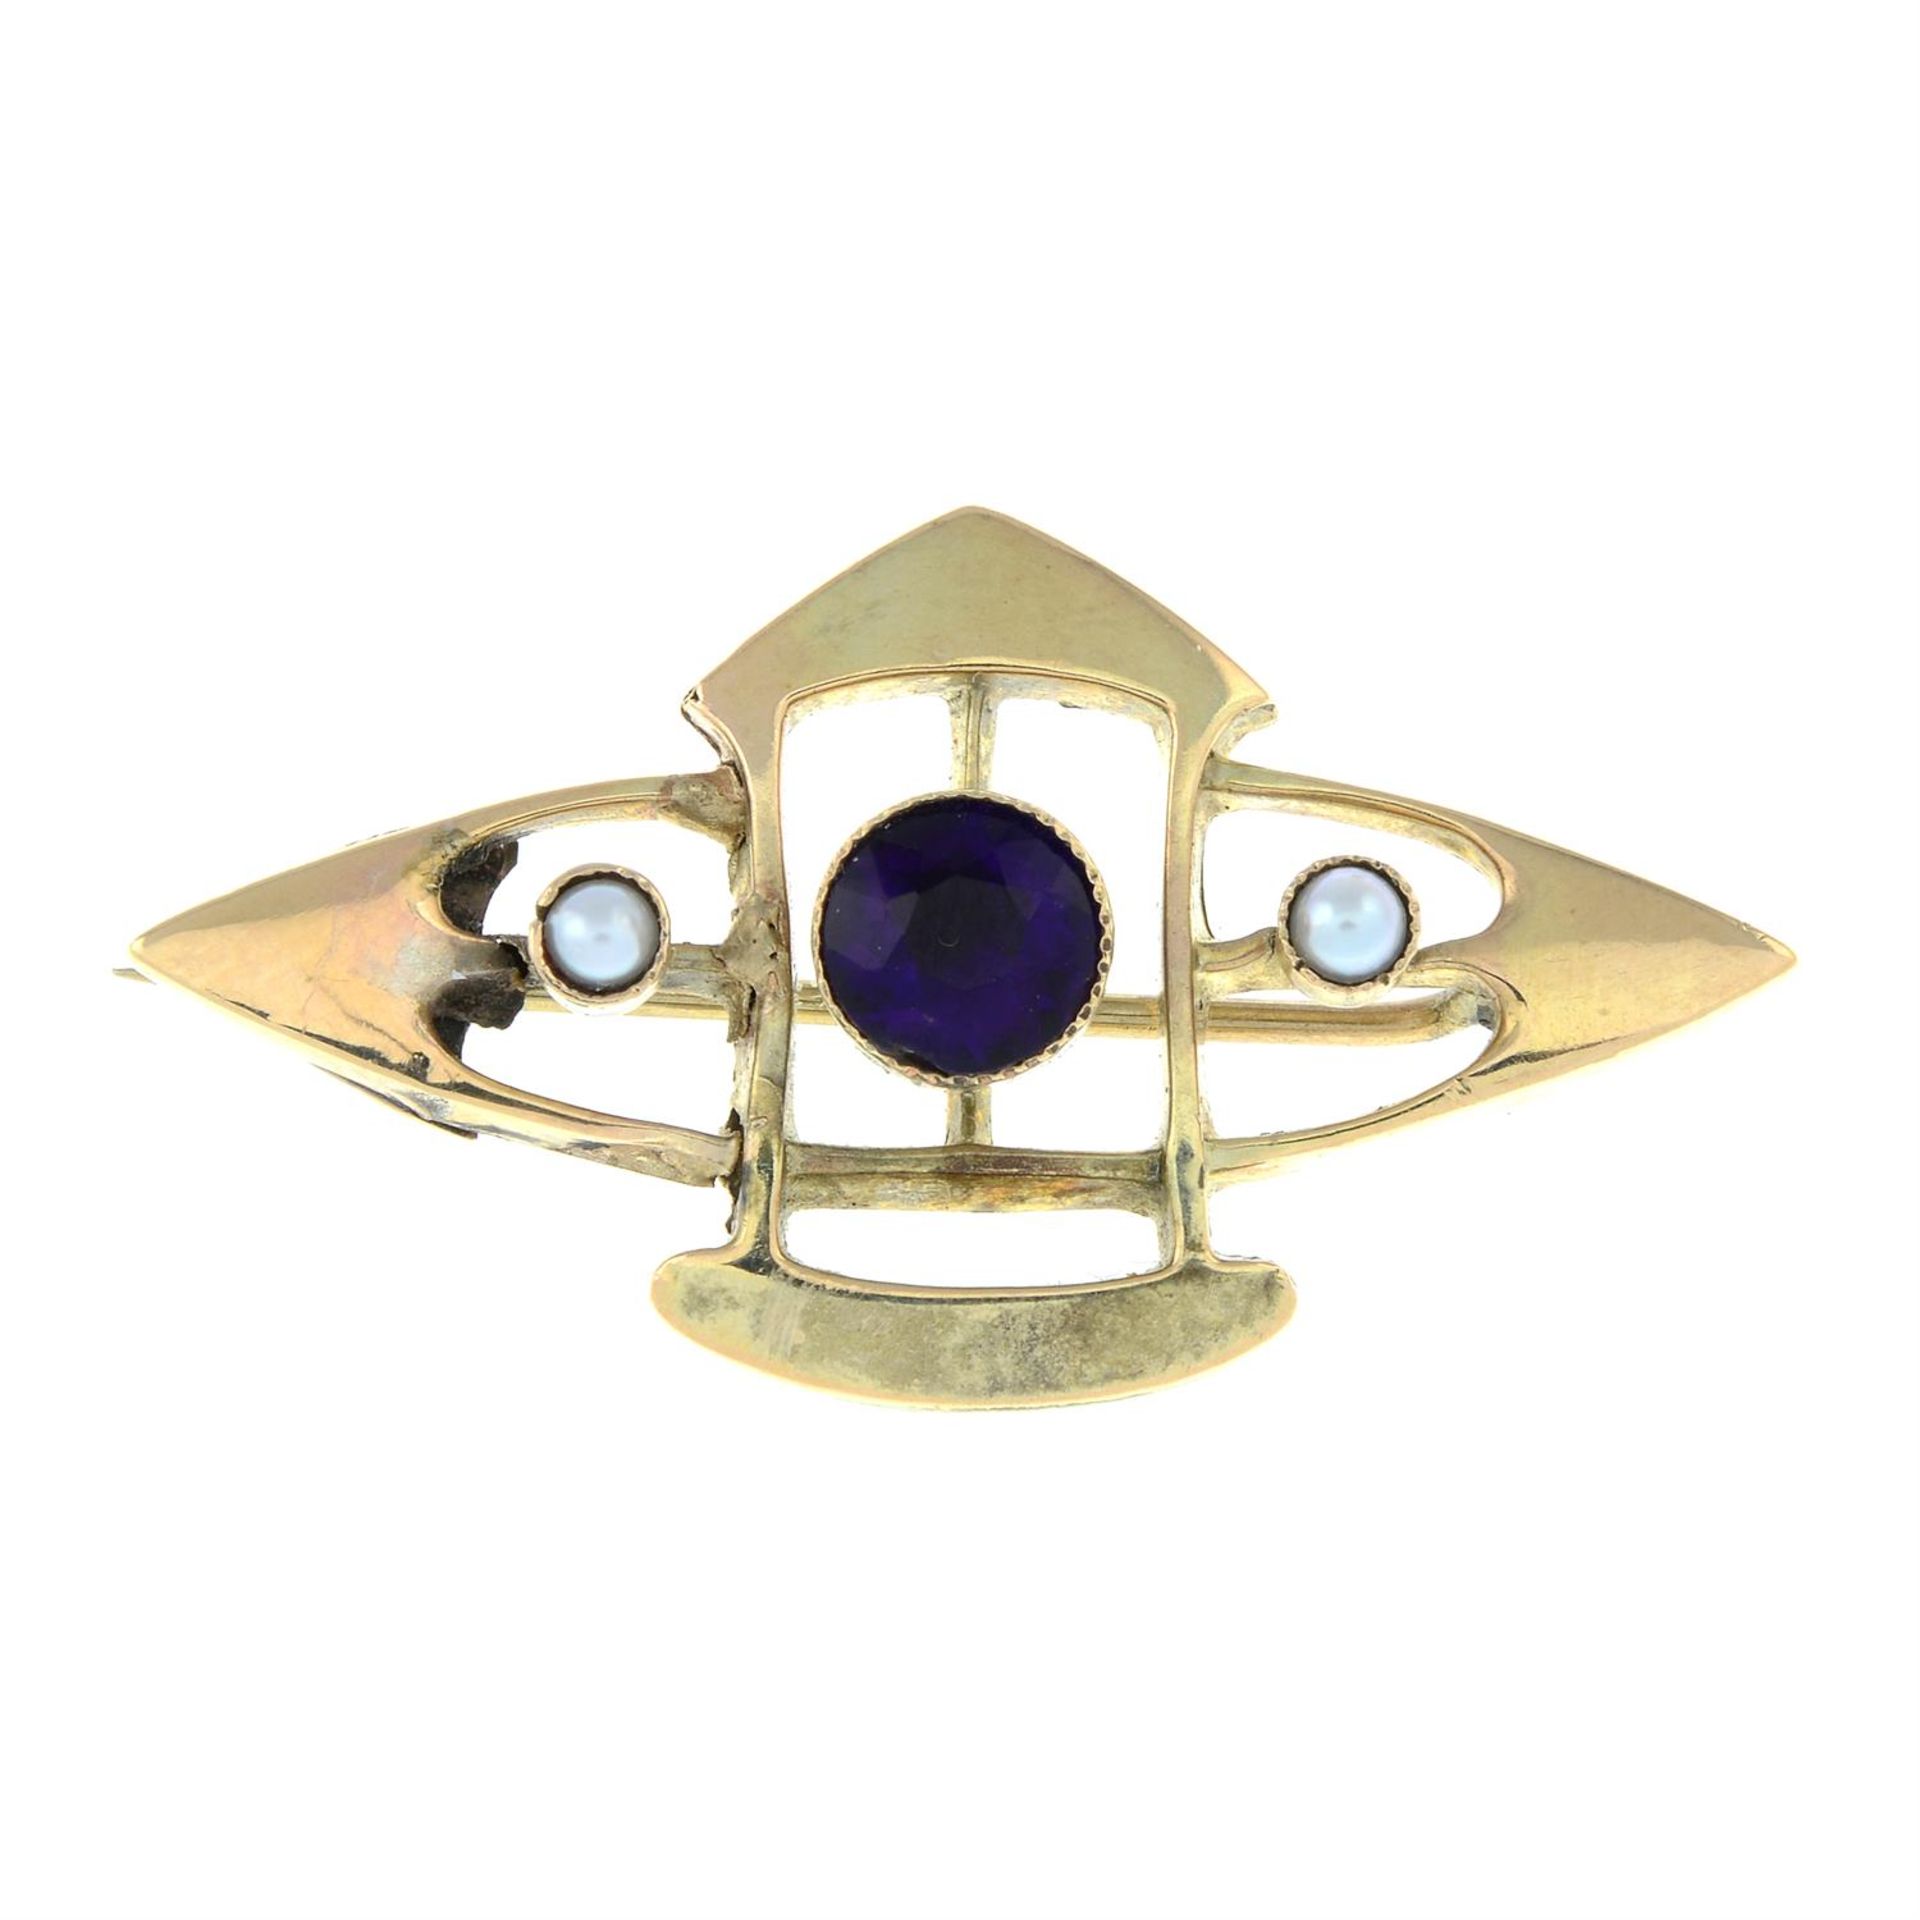 An early 20th century 9ct gold amethyst and split pearl brooch.